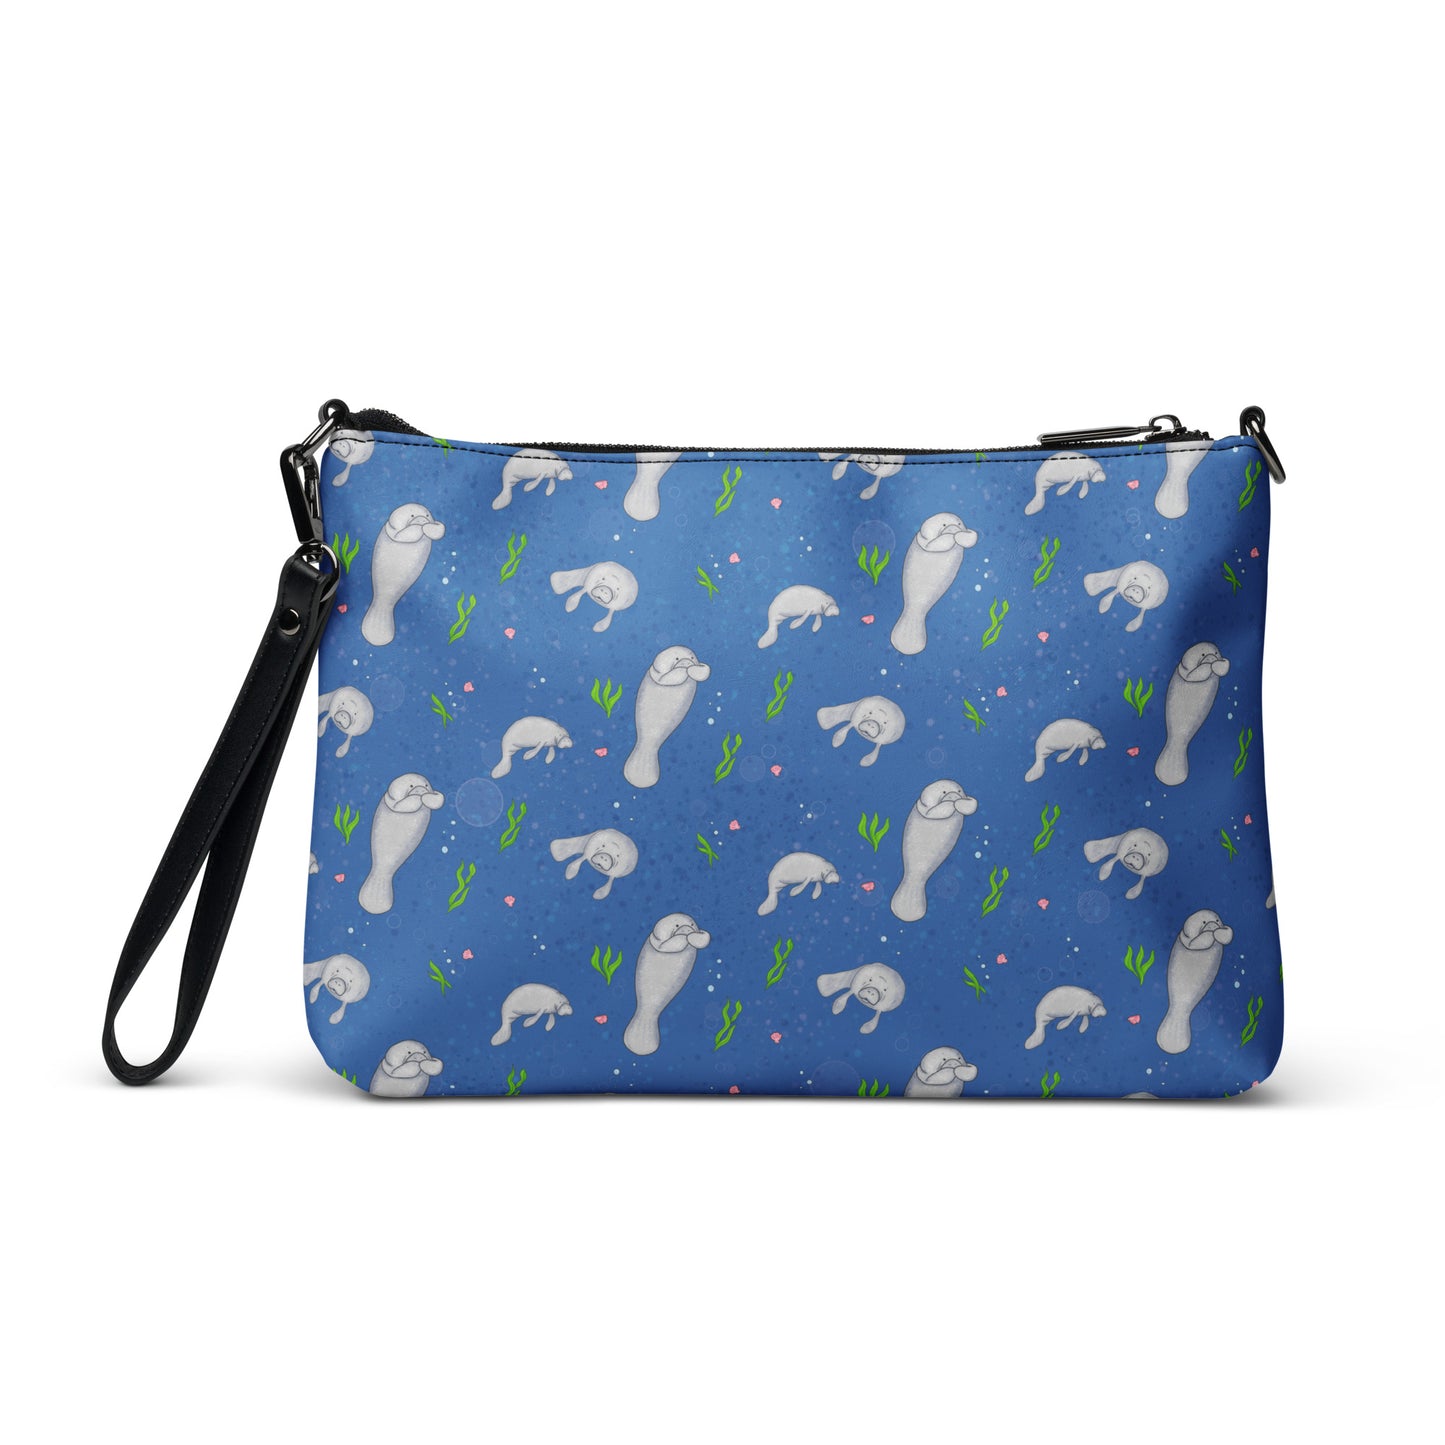 Manatee crossbody bag. Faux leather with polyester lining and dark grey hardware. Comes with adjustable removable wrist and shoulder straps. Back view of bag with manatees patterned on a dark blue background.